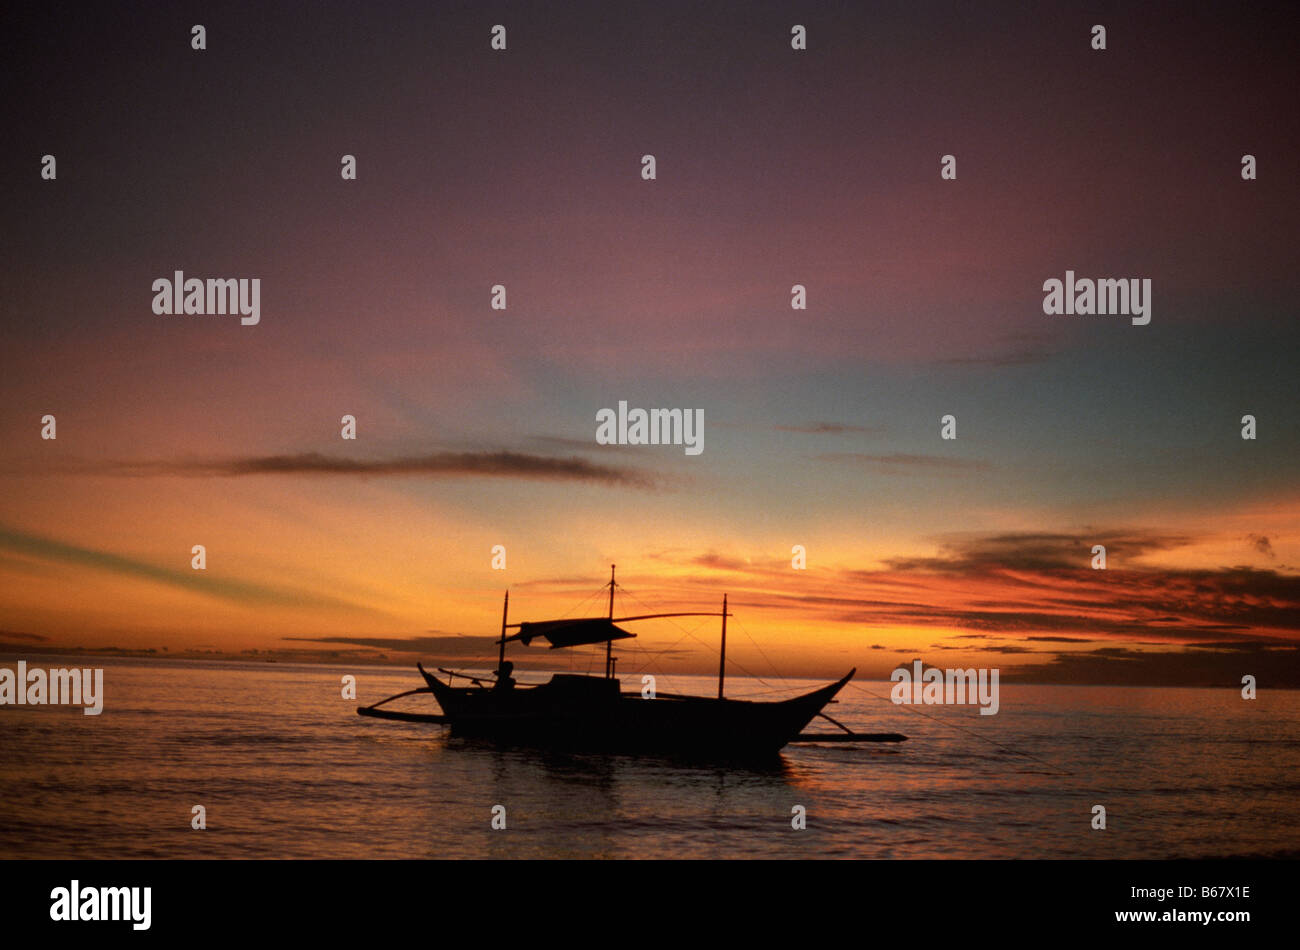 A colorful sunset and a silhouette of a fishing boat on Boracay Island, the Philippines Stock Photo